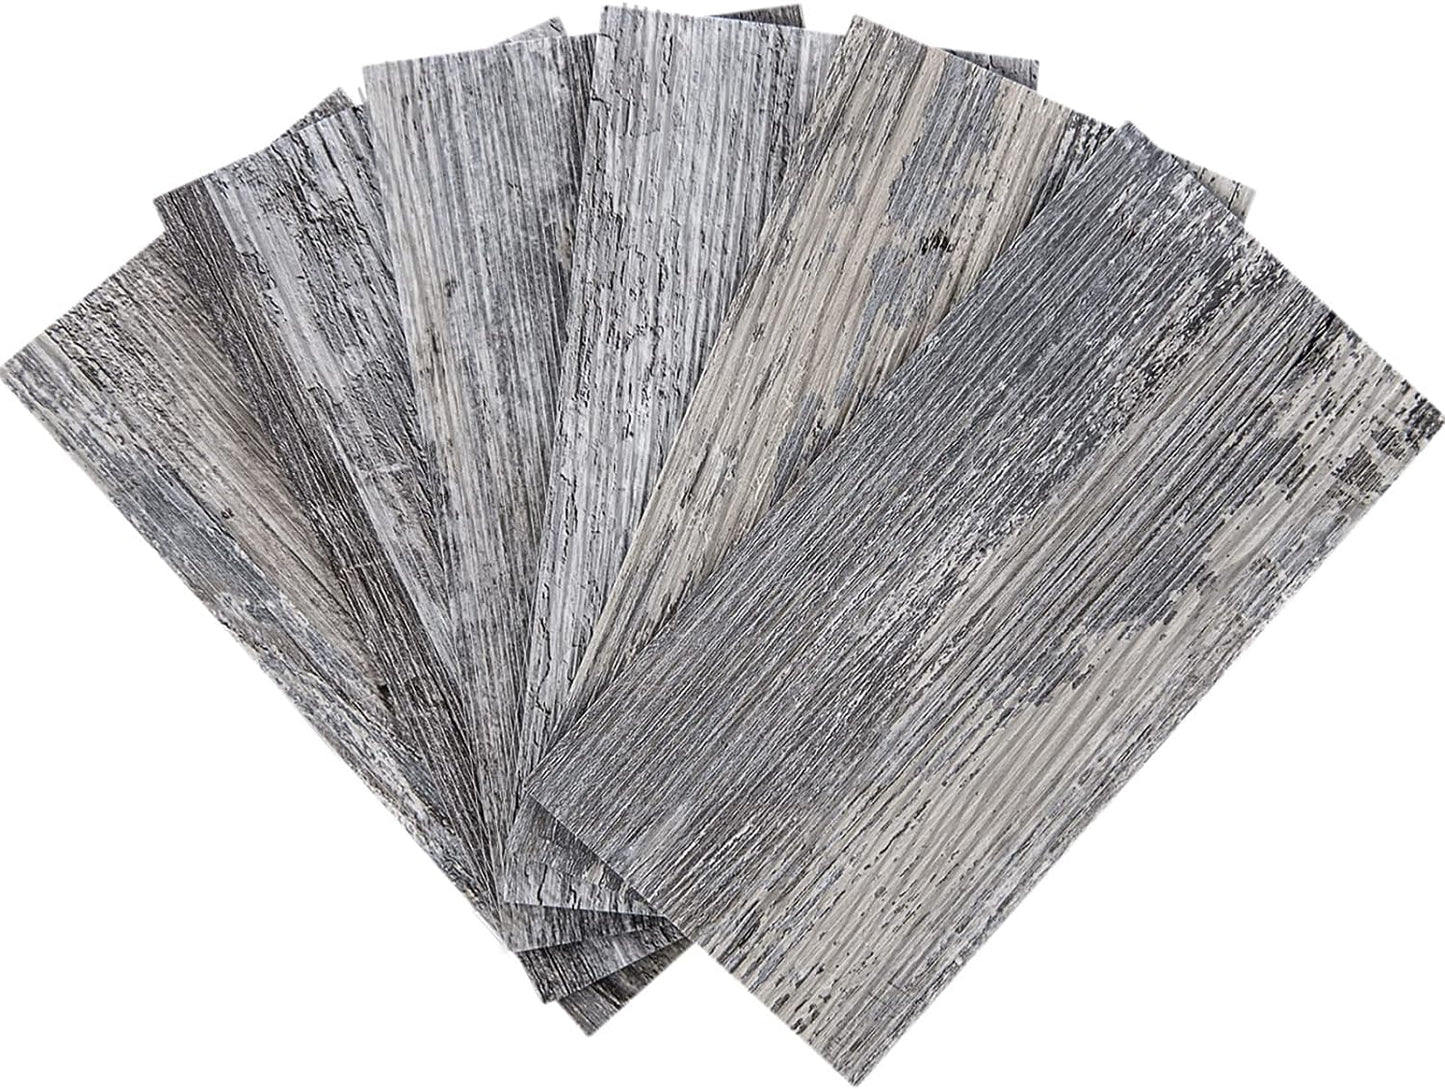 102-Piece Peel and Stick Tile Backsplash, 3In. X 6In. Distressed Wood Plank